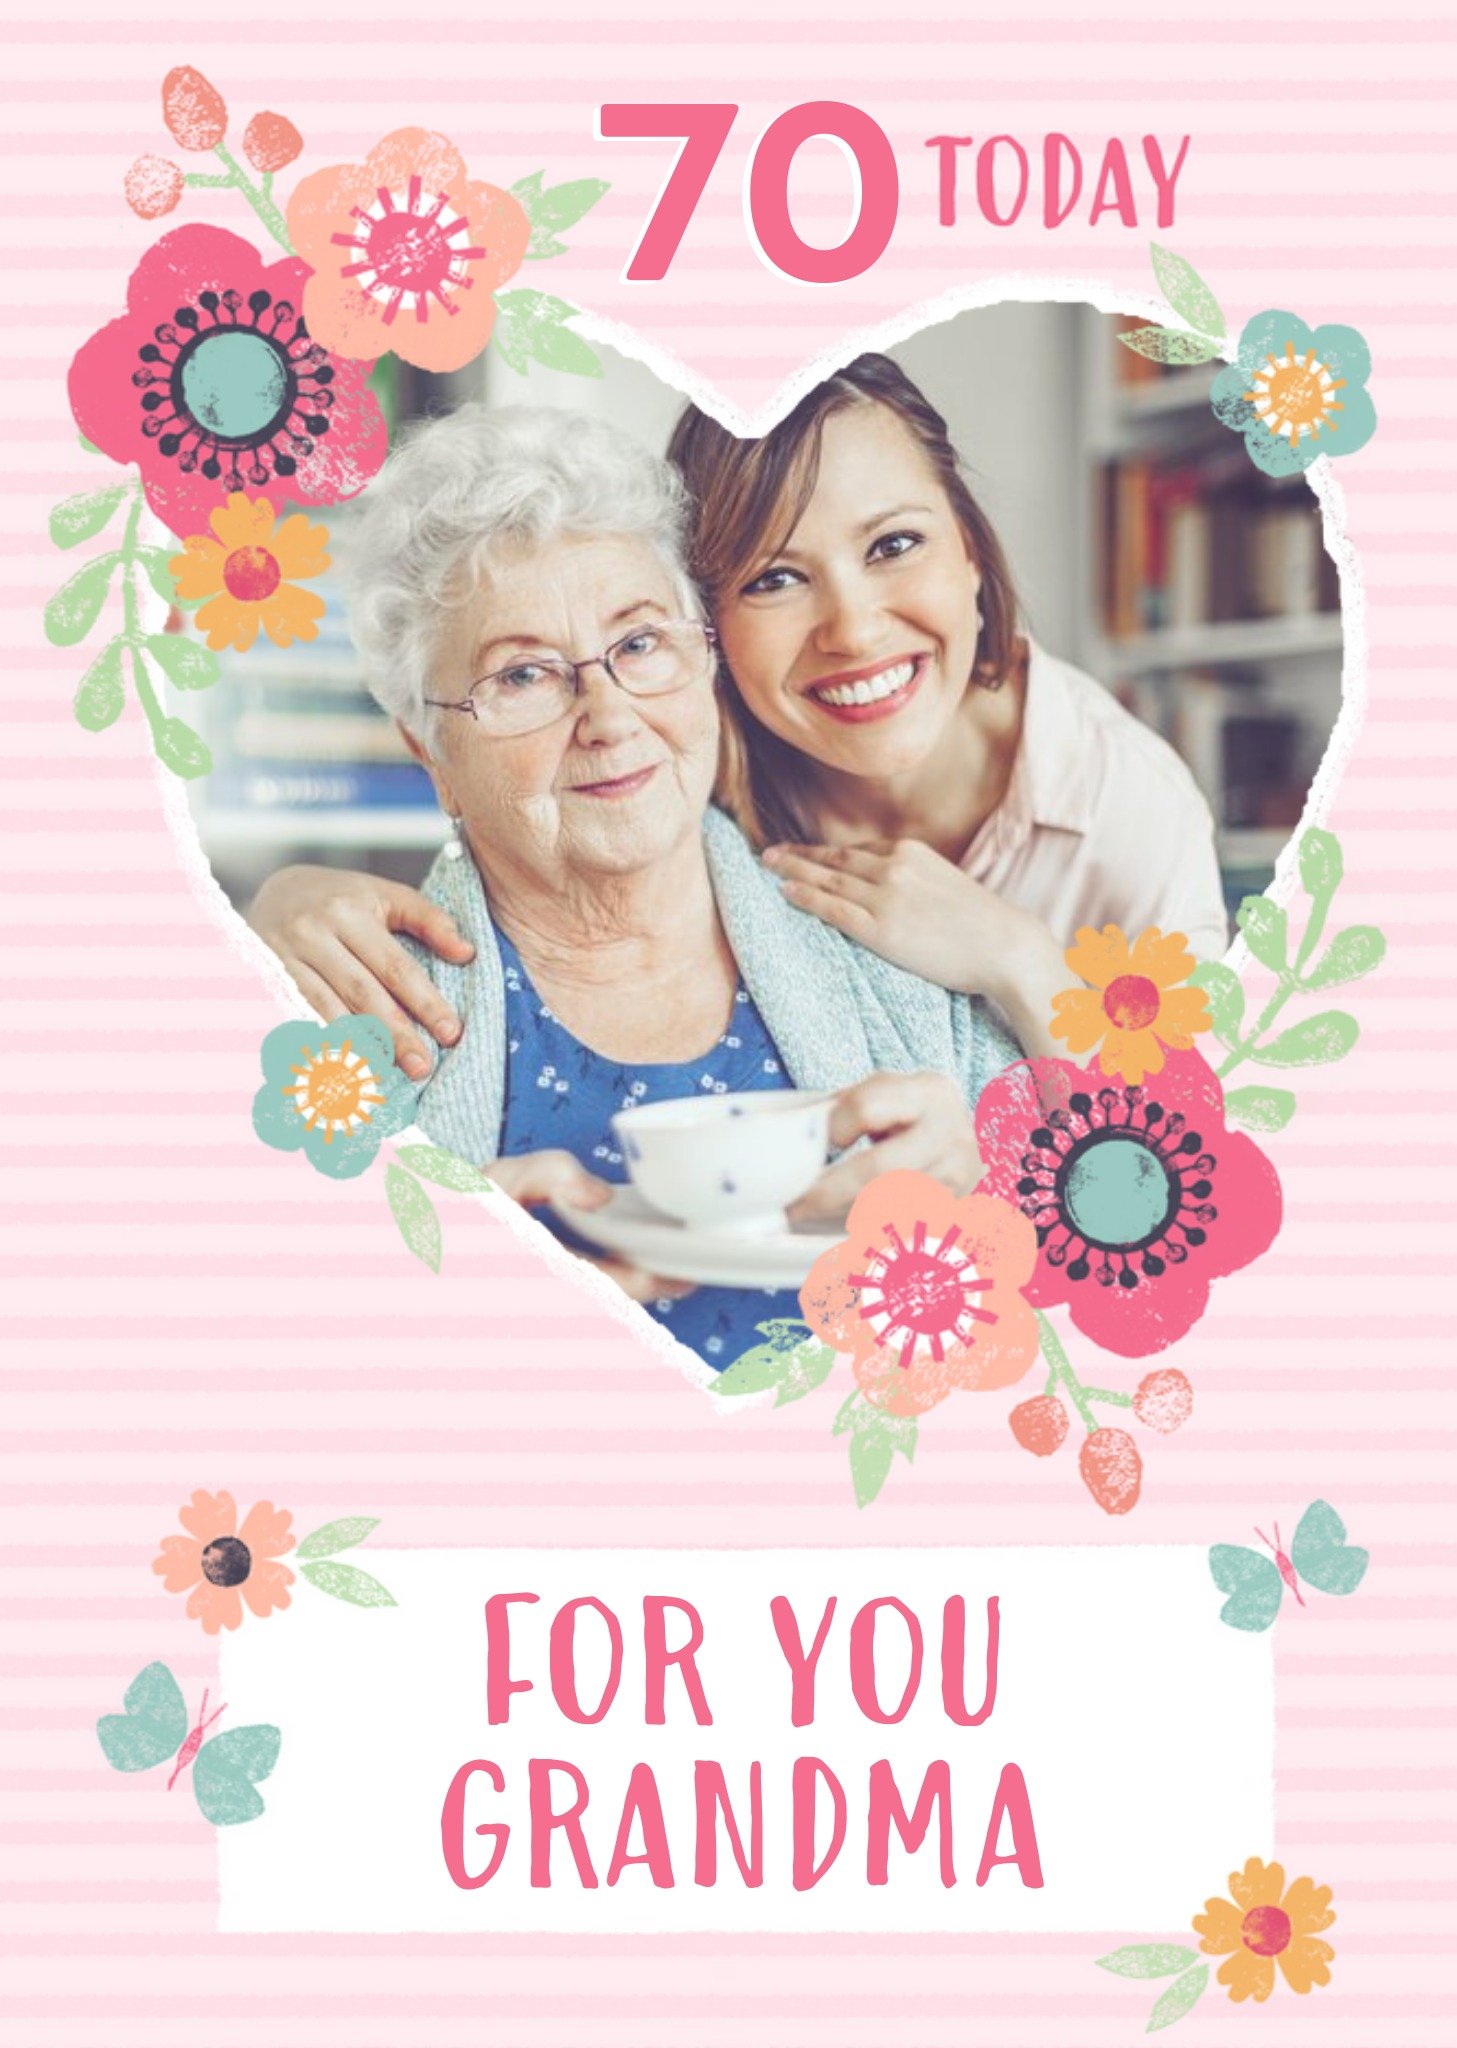 Moonpig Striped And Flower Photo Upload Design For You Grandma 70 Today Birthday Card, Large